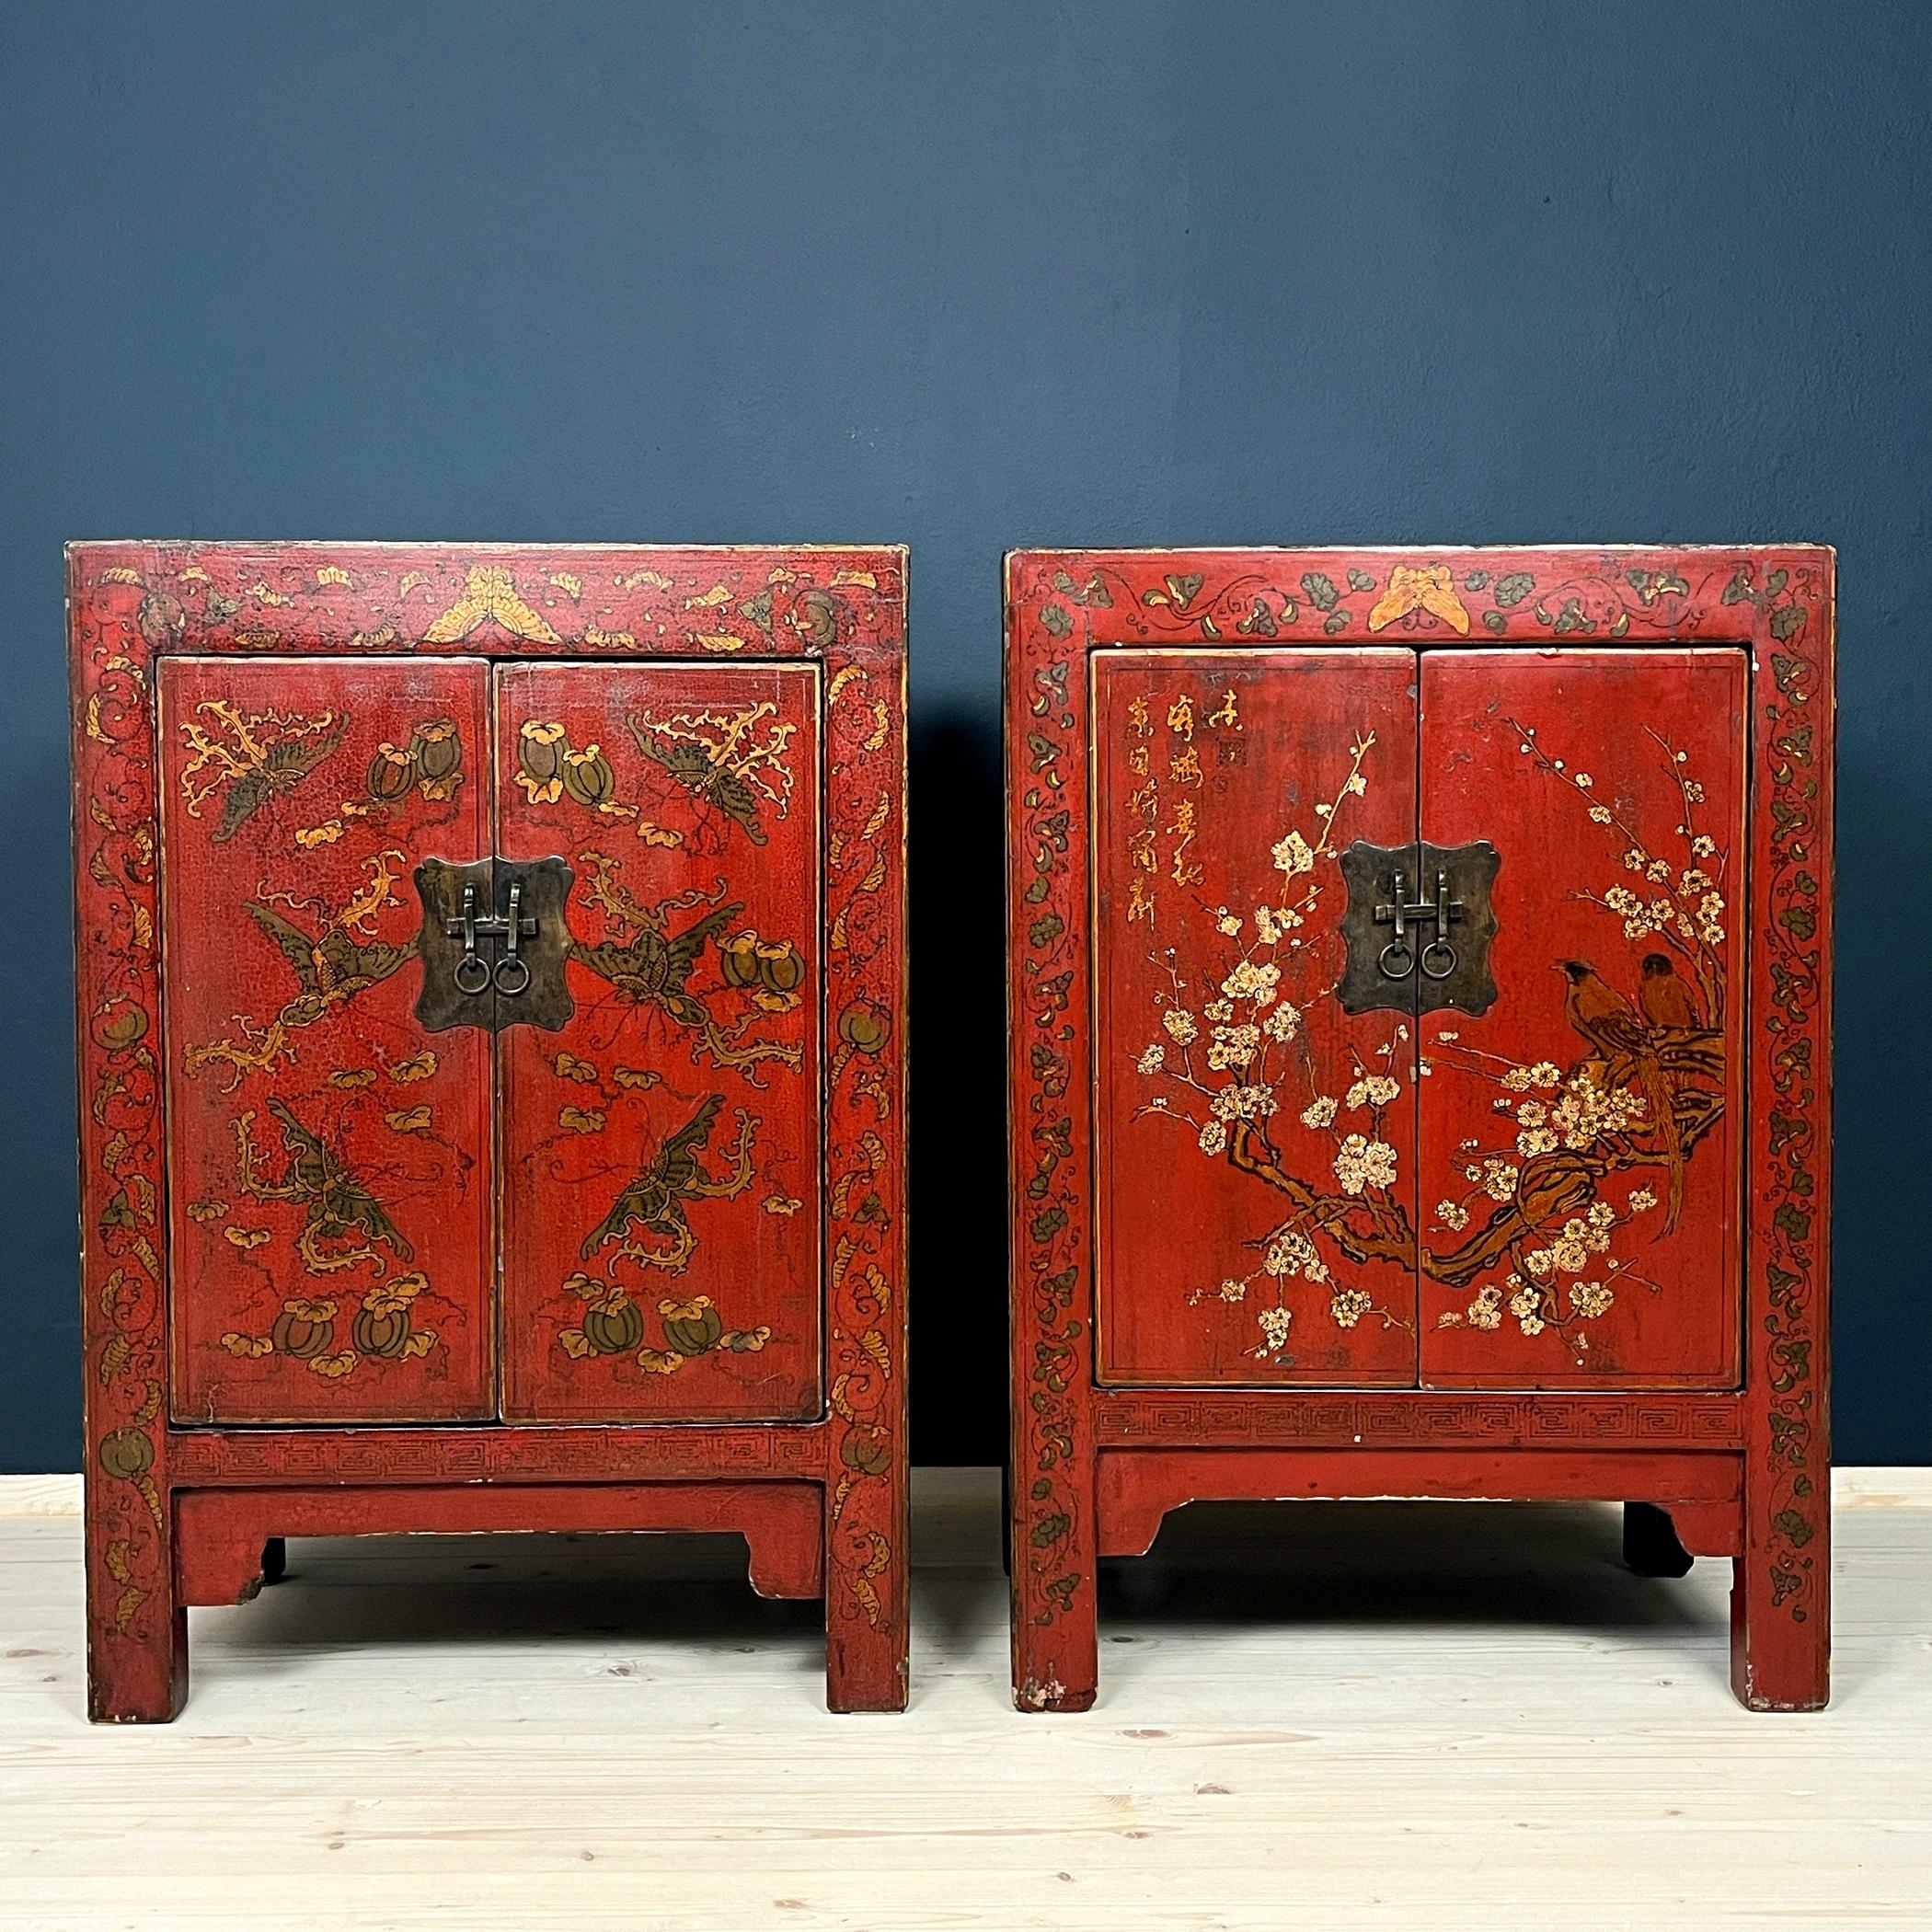 Elevate your living space or bedroom with this exquisite pair of Italian bedside tables from the mid-20th century. Crafted from painted wood in the style chinoiserie, these tables are a true testament to the artistry of the era. With two spacious